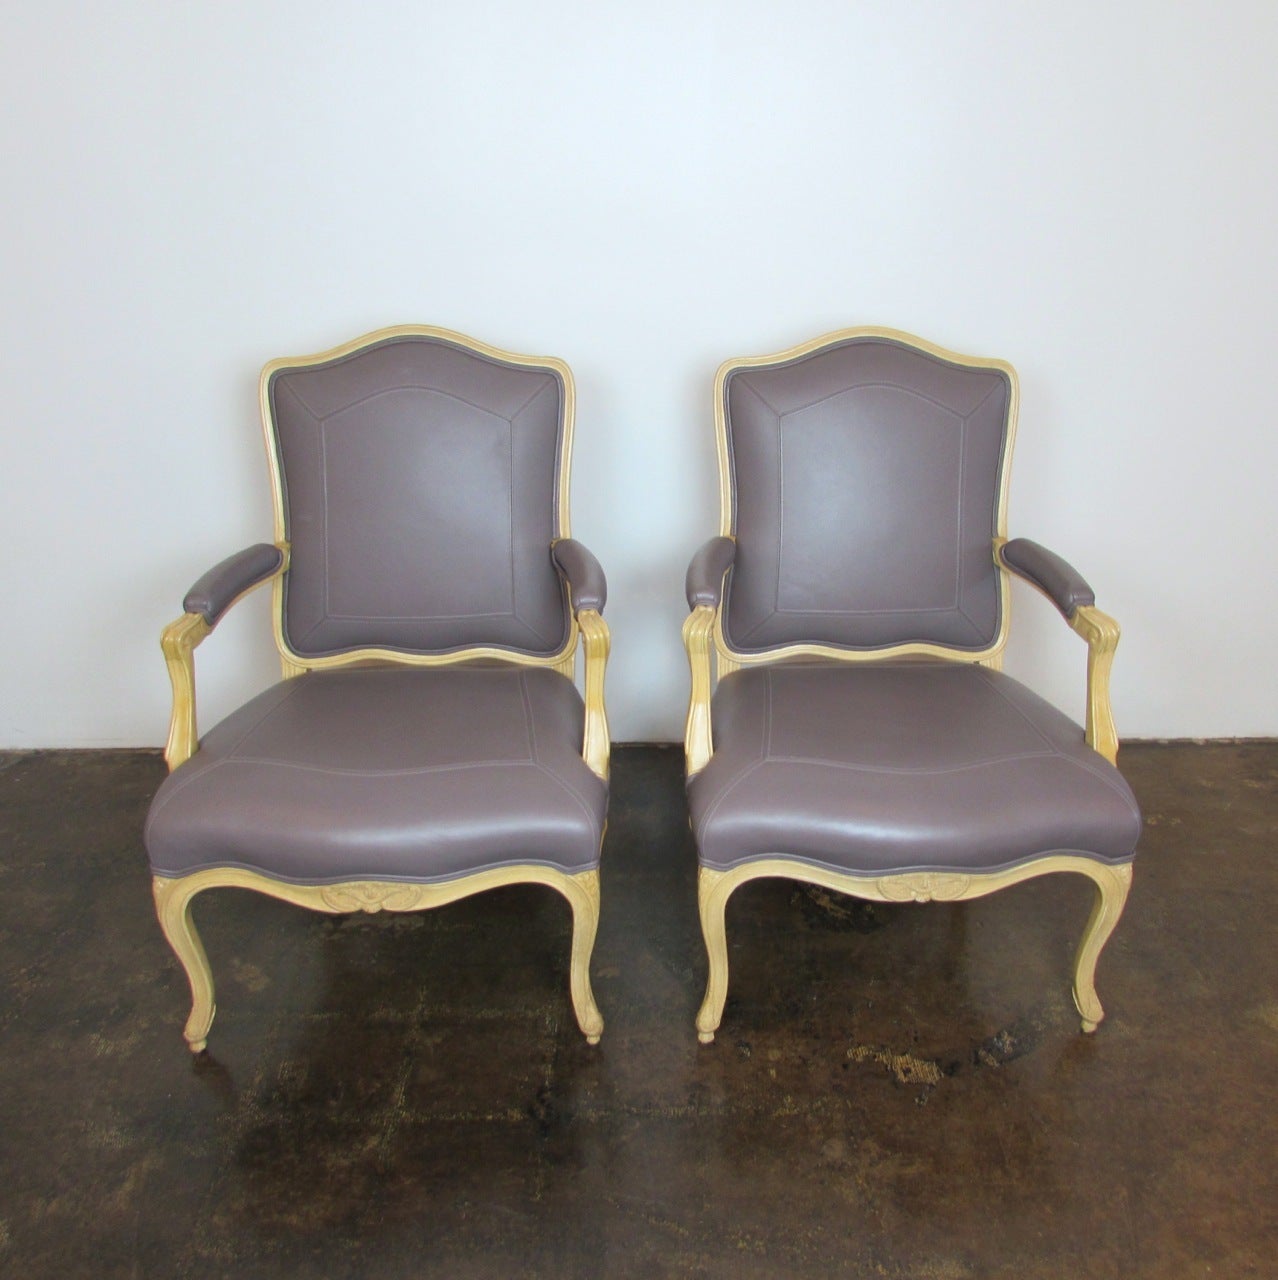 Pair of leather Villa Fauteuil arm chairs designed by Sally Sirkin Lewis for J. Robert Scott.